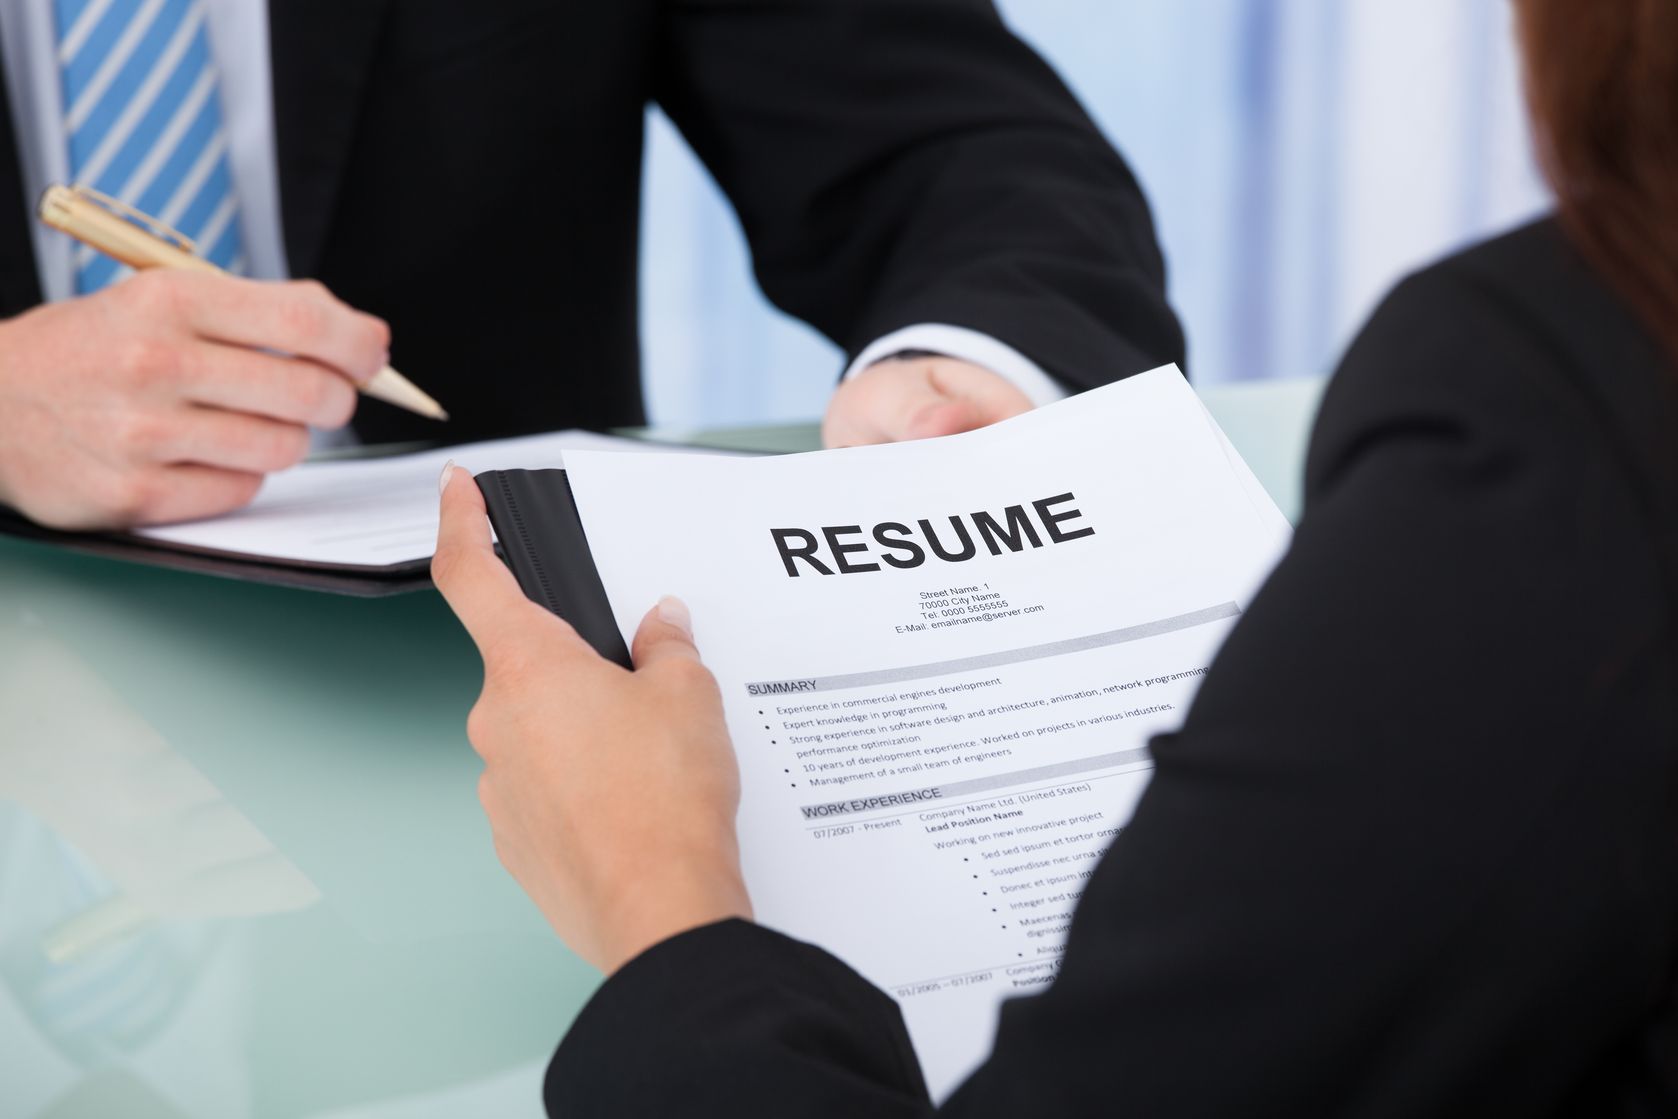 resume writing and interview skills